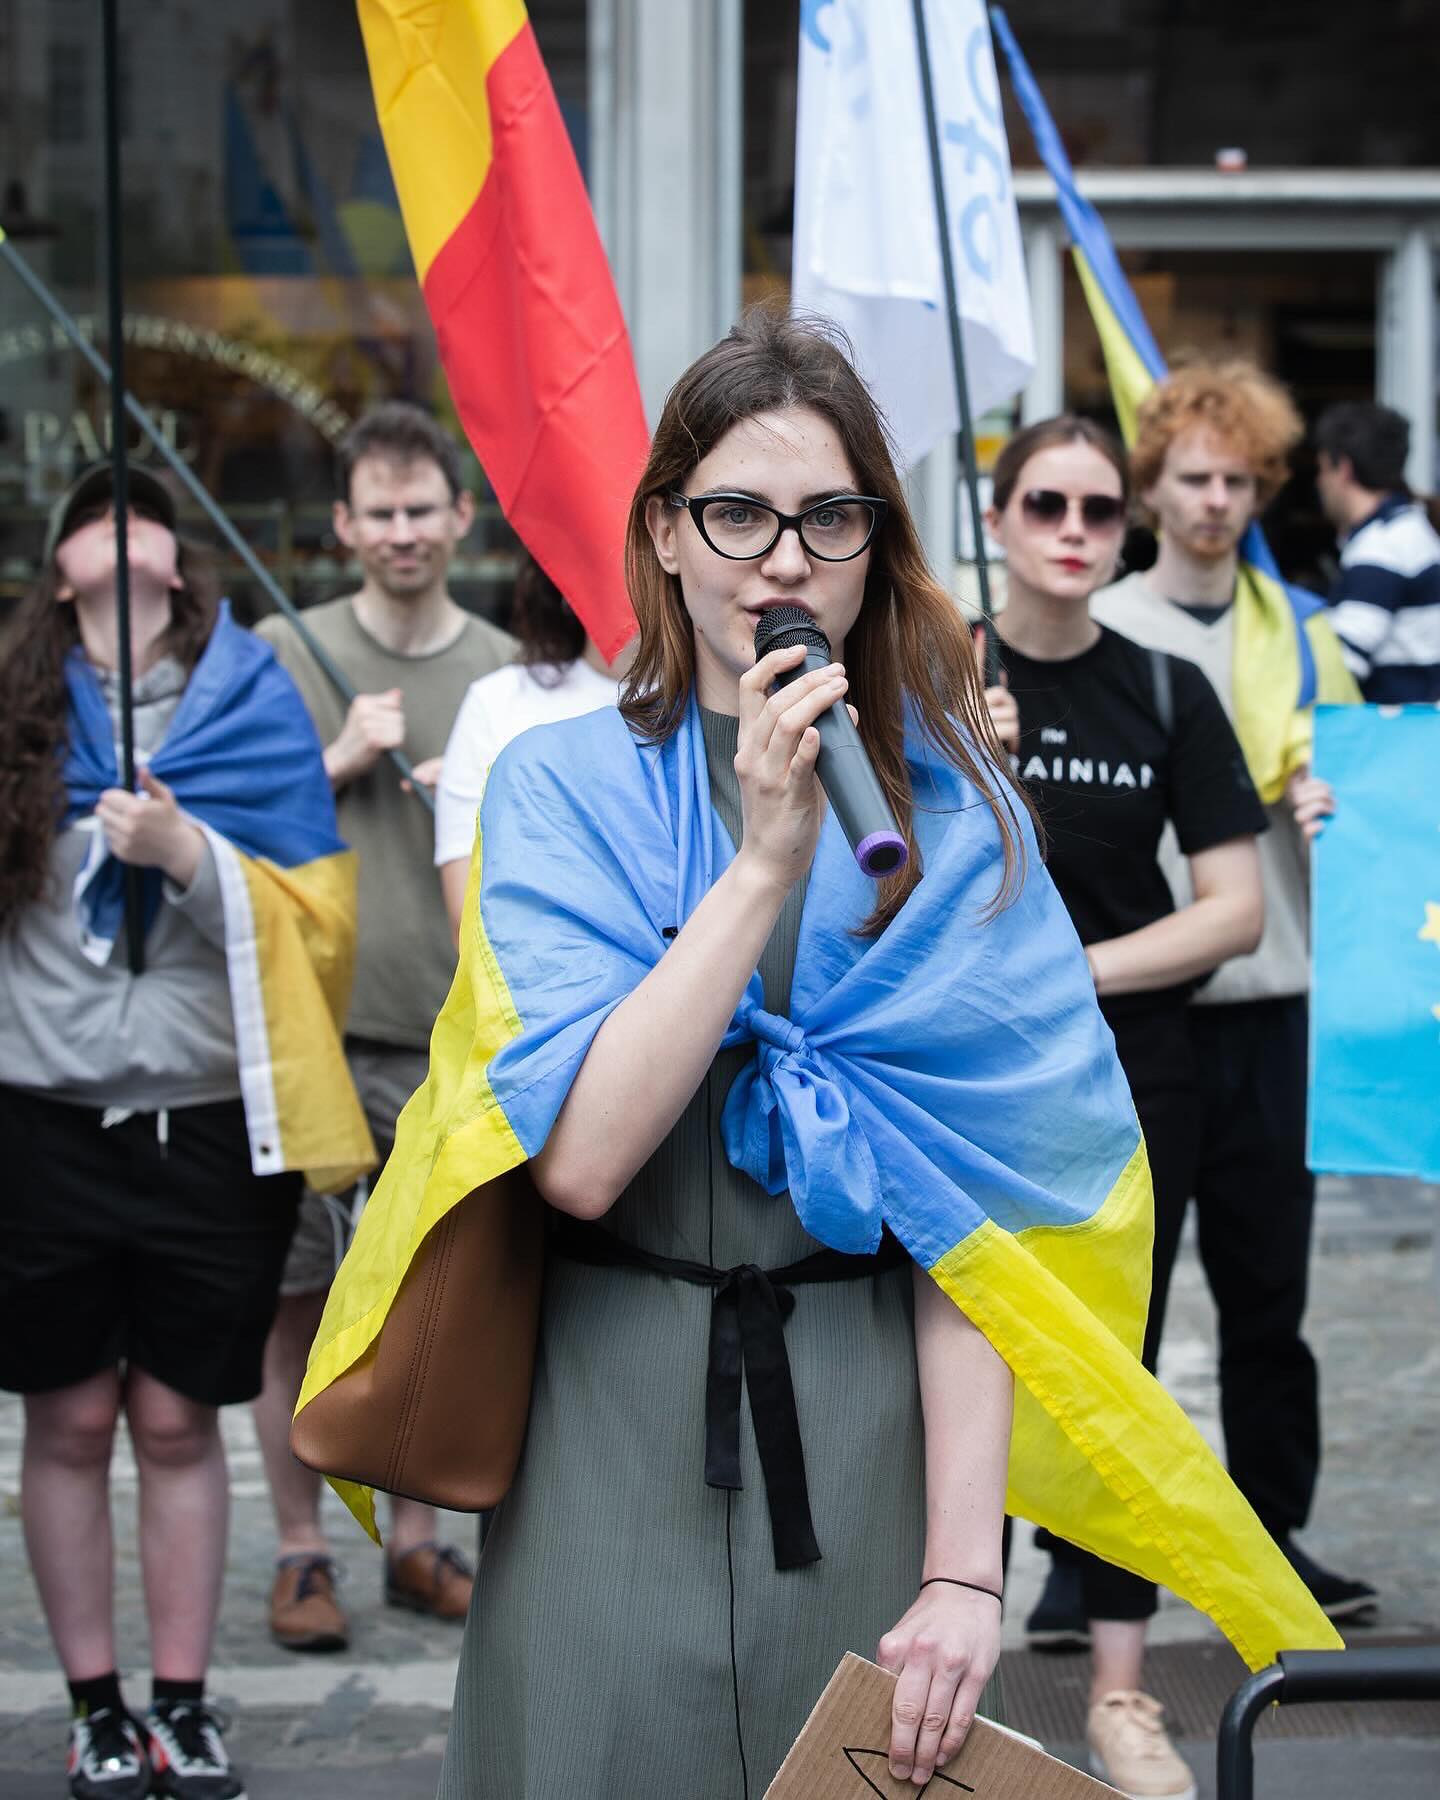 demonstration organized by Promote Ukraine and ICUV - International Centre for Ukrainian Victory took place near the Belgian Federal Parliament